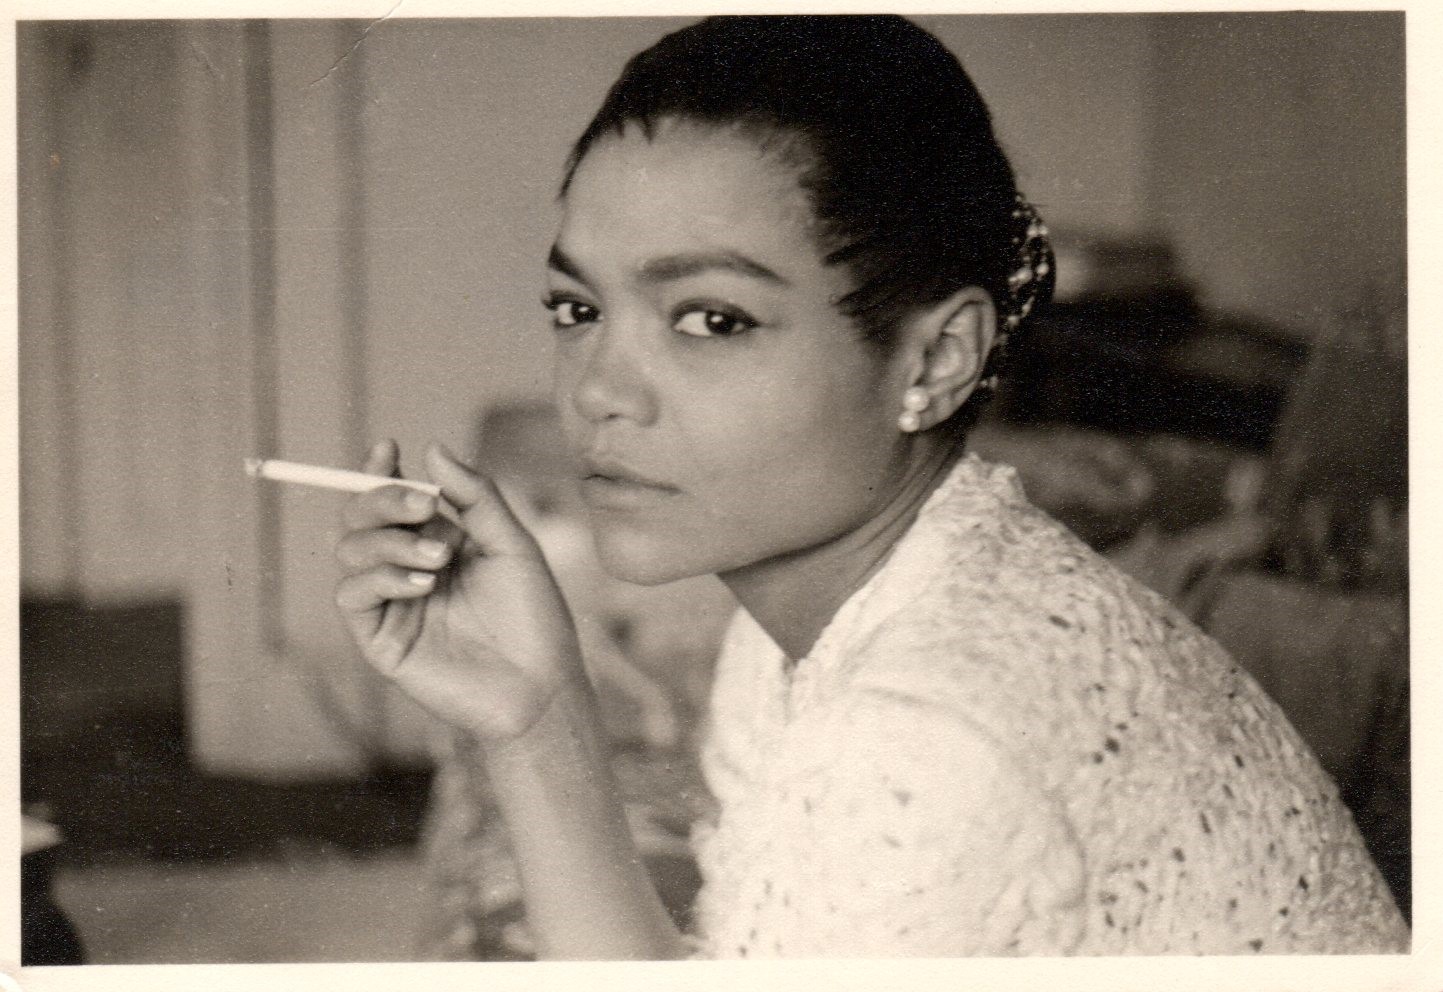 Eartha Kitt (American, 1927-2008) - American singer, dancer, actor, comedienne and activist - Image 7 of 9